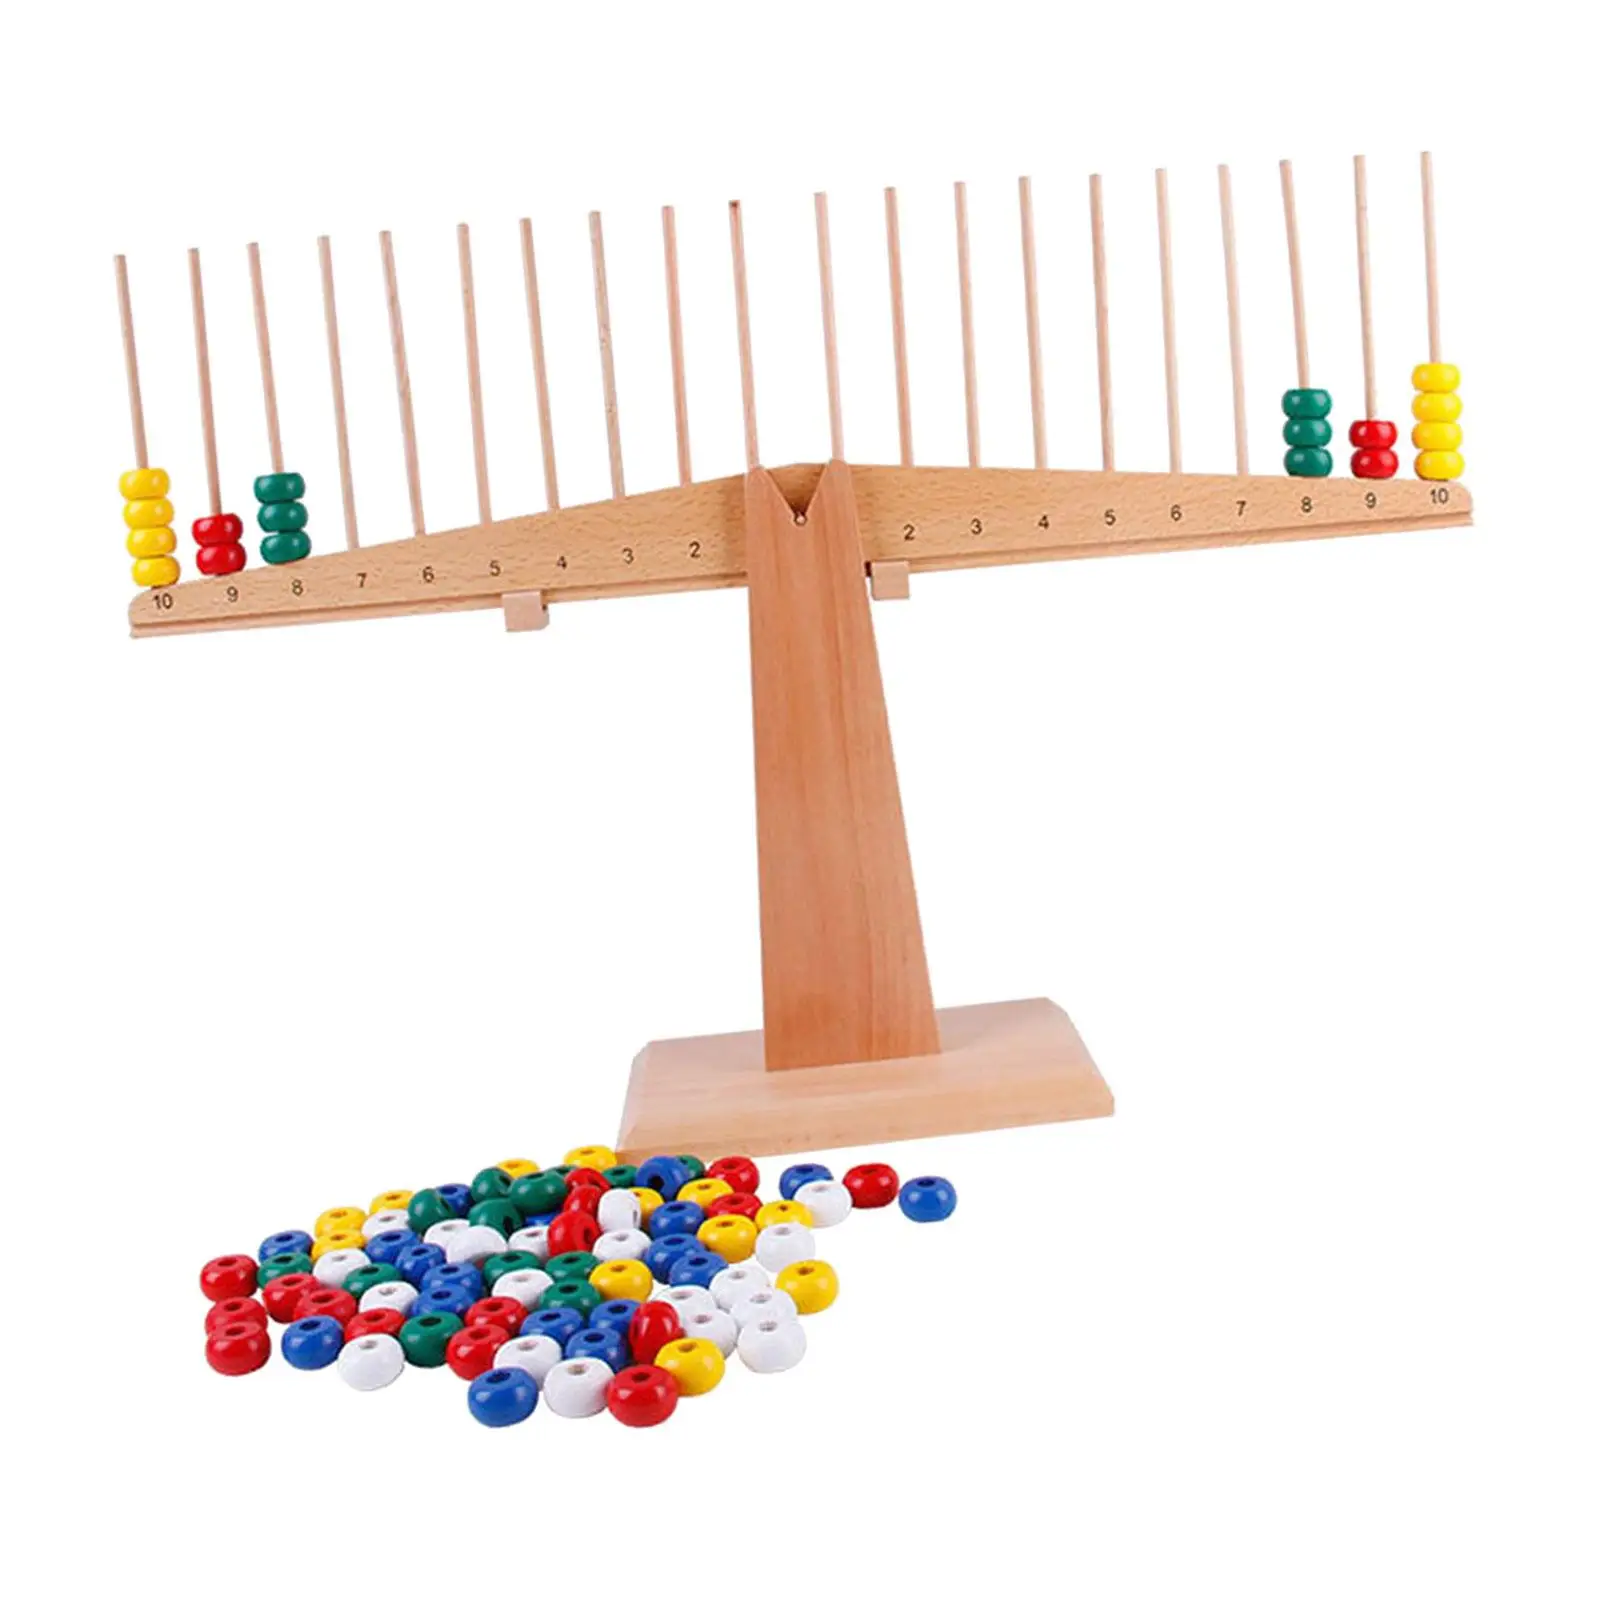 Kids Balance Scale Develops Motor Skills Visual Perception Skills Montessori Educational Toy for Ages 3 4 5 Year Old Ages 3+